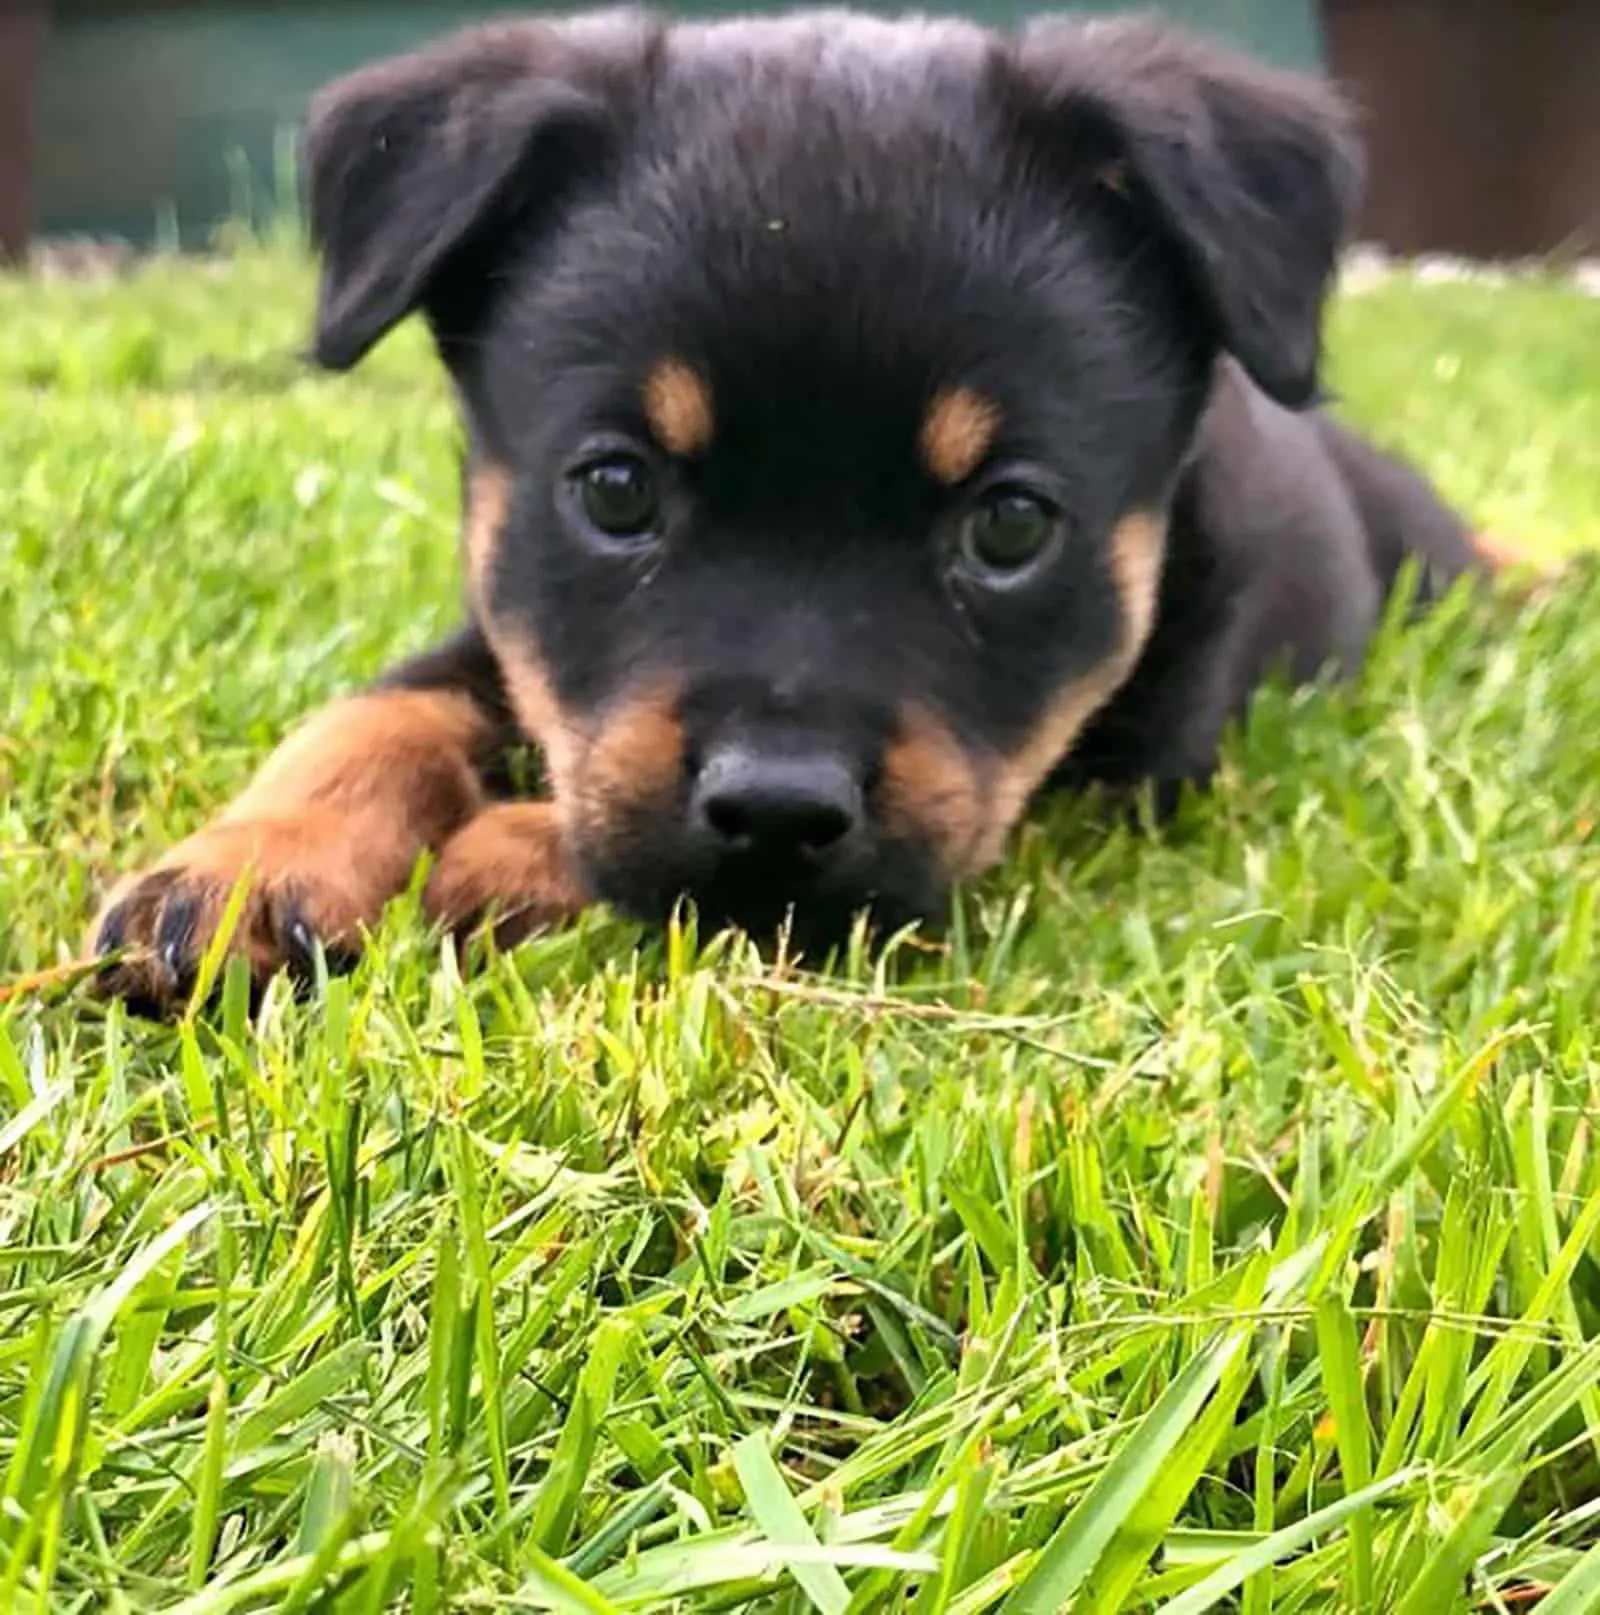 aussie rottie puppy lying on the grass in the park